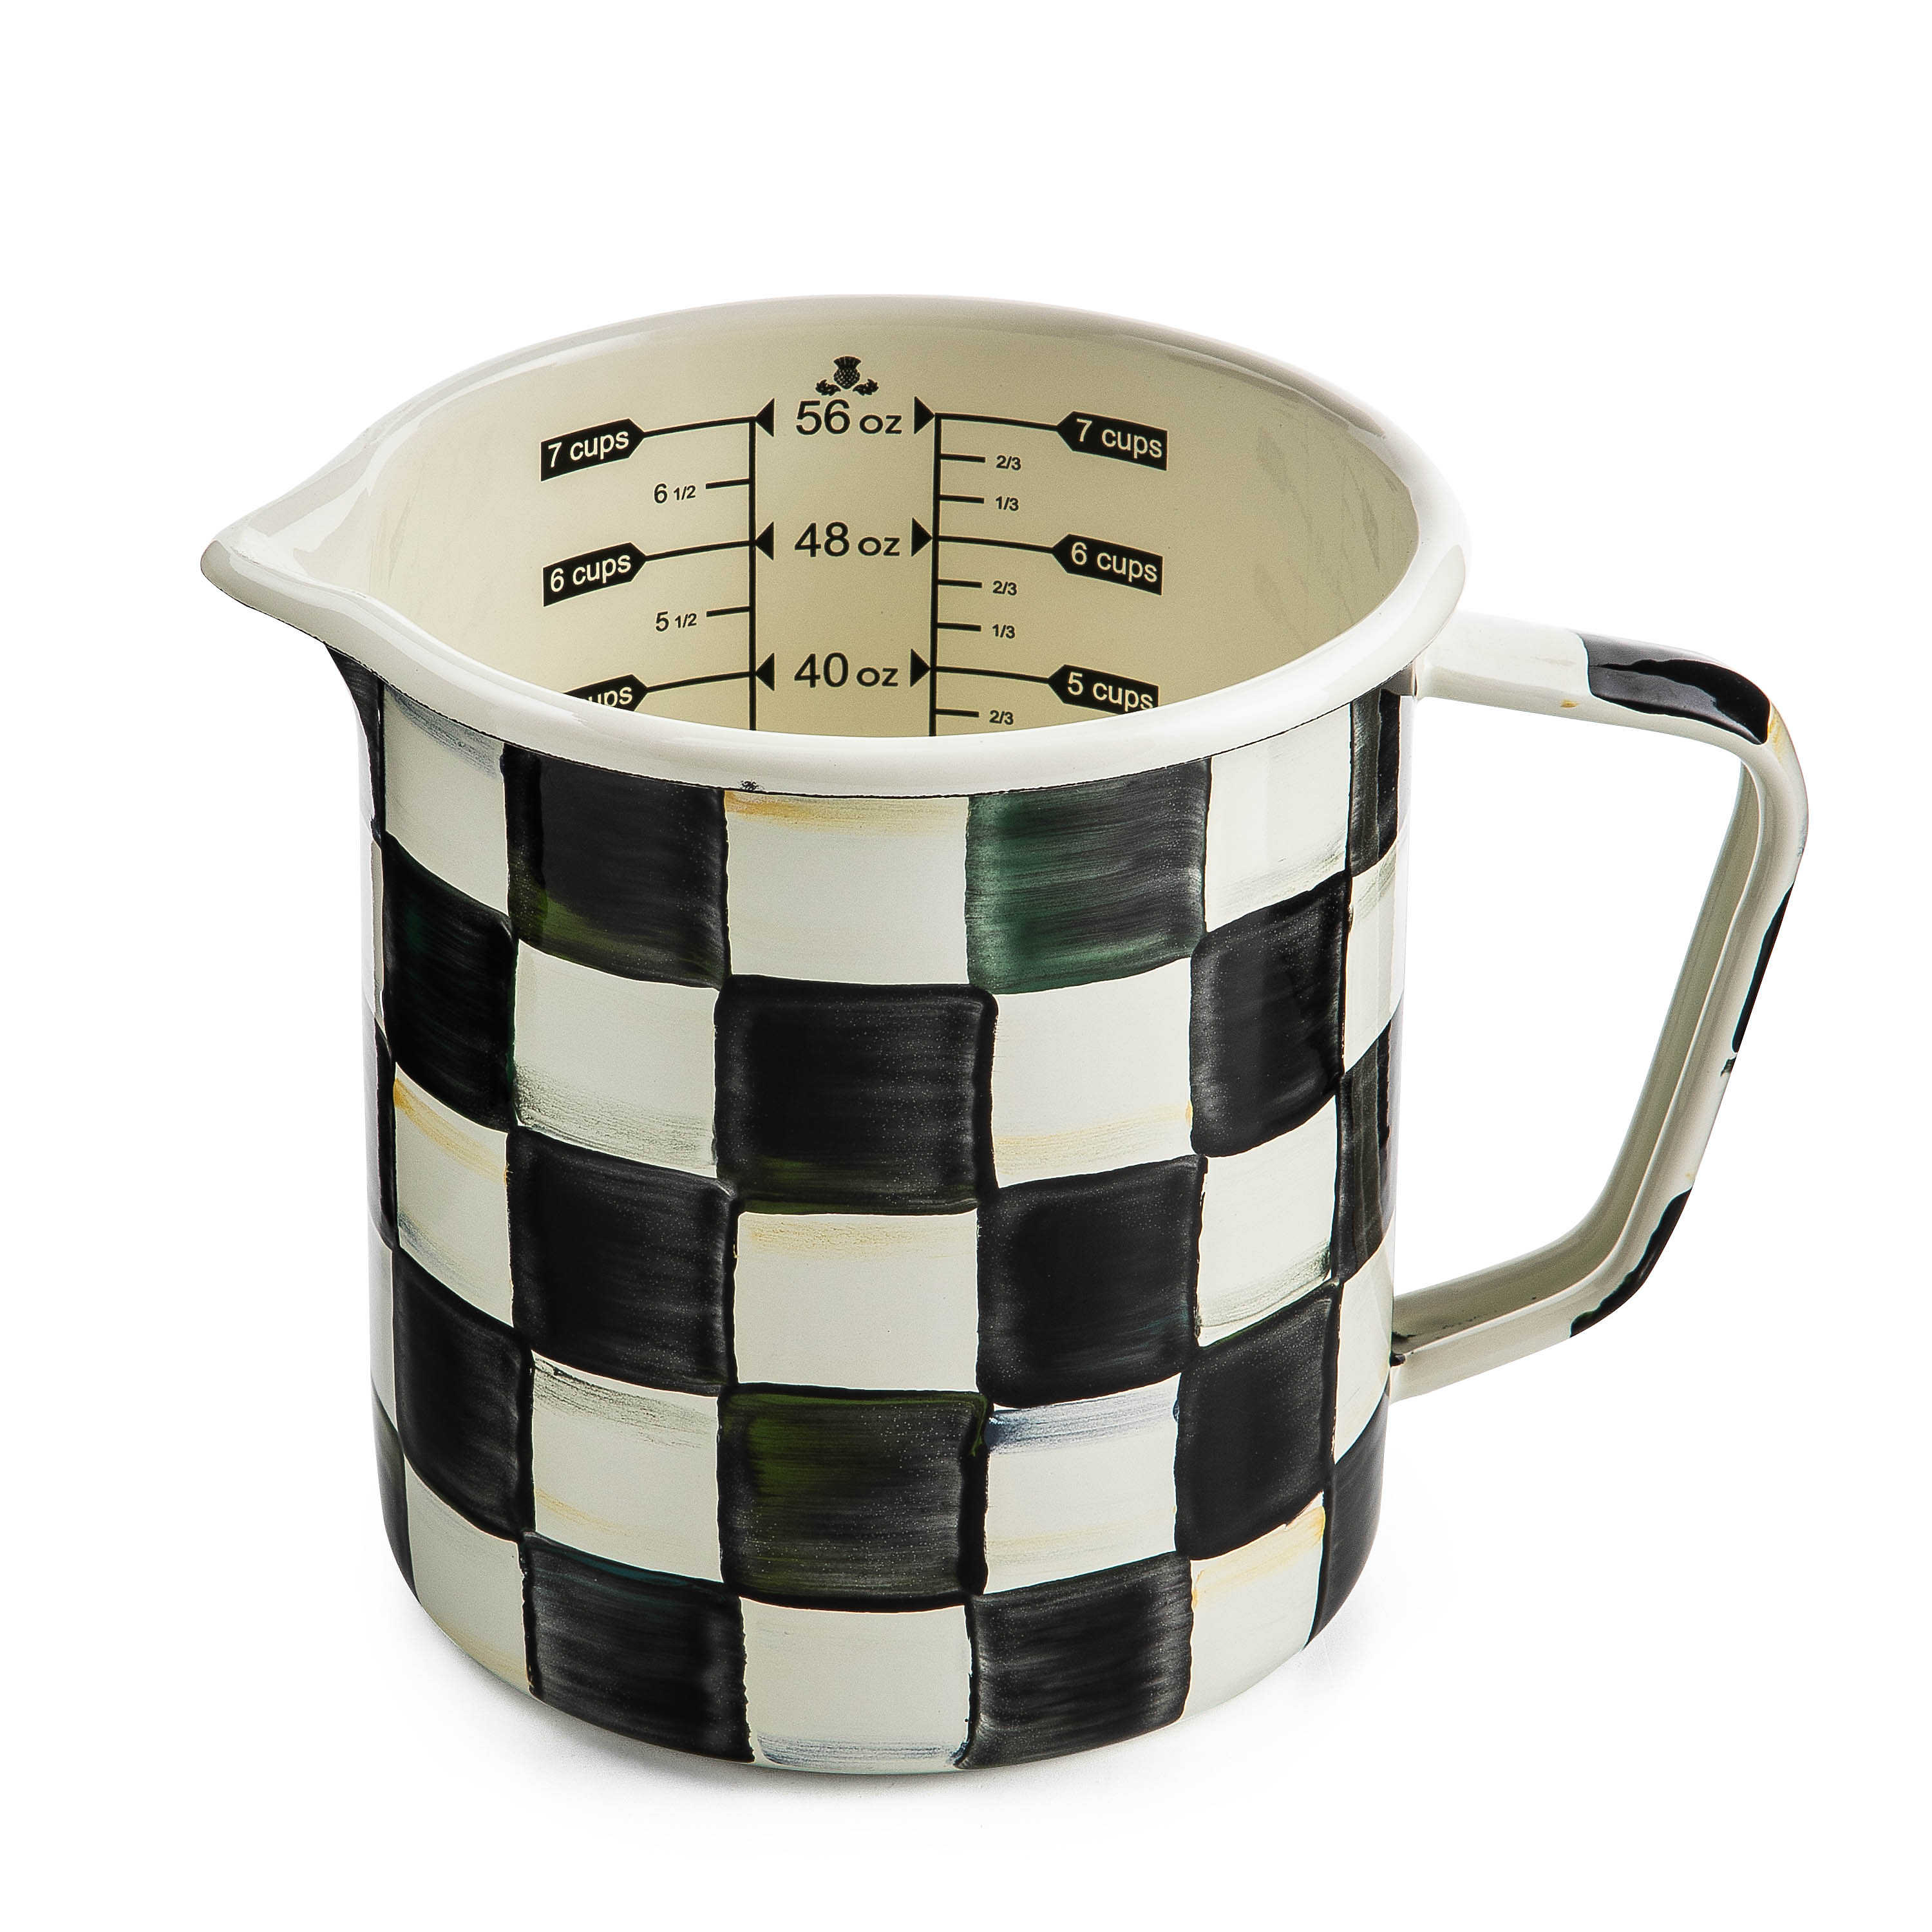 Courtly Check 7 Cup Measuring Cup mackenzie-childs Panama 0